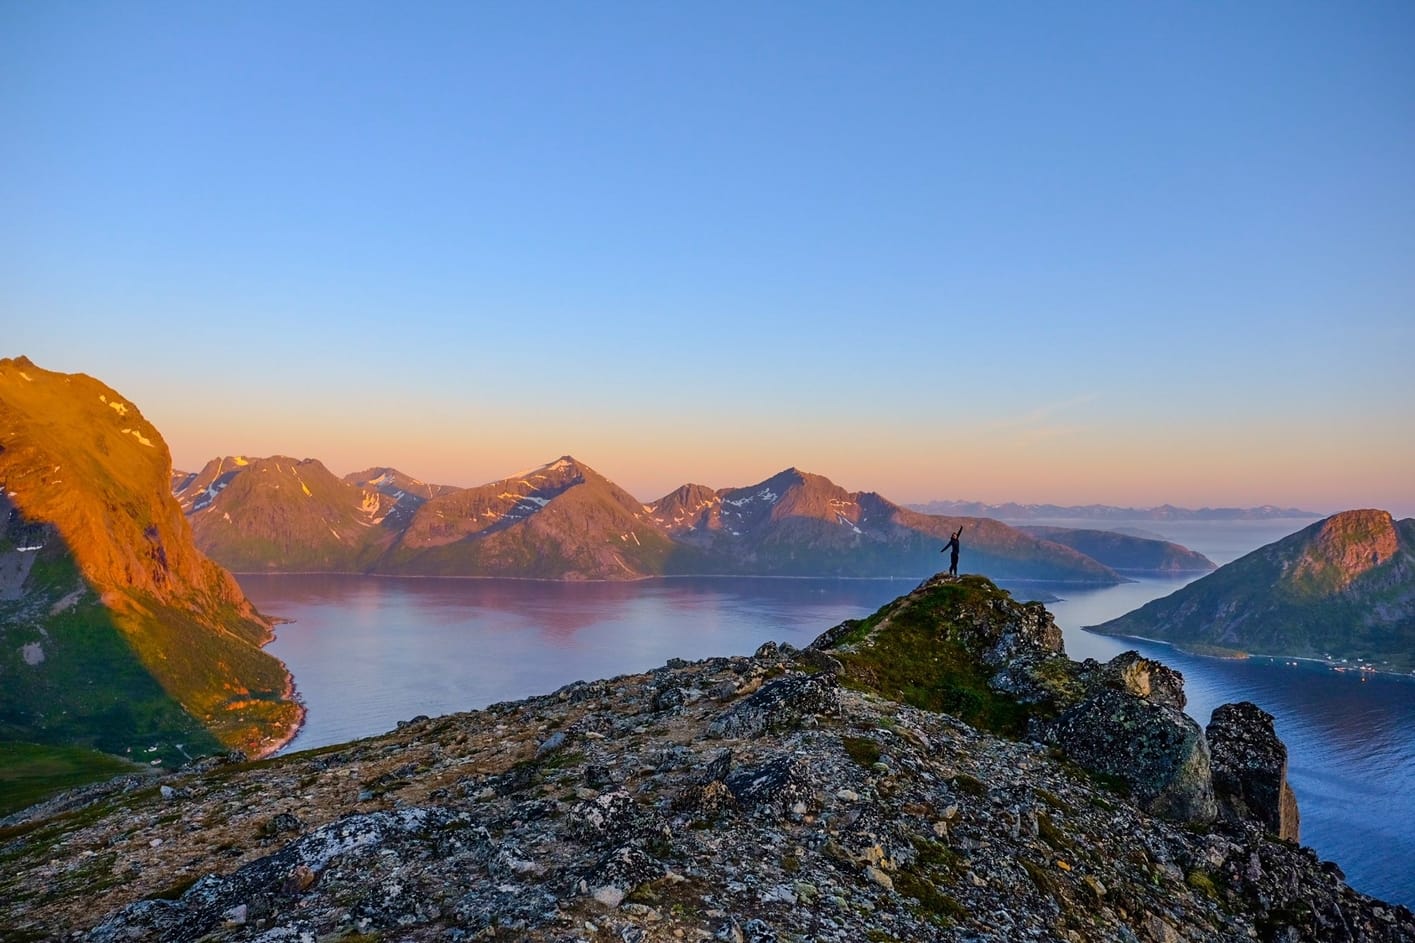 Brosmetinden, one of the shortest and easiest hikes in Tromso that still has panoramic views throughout the route